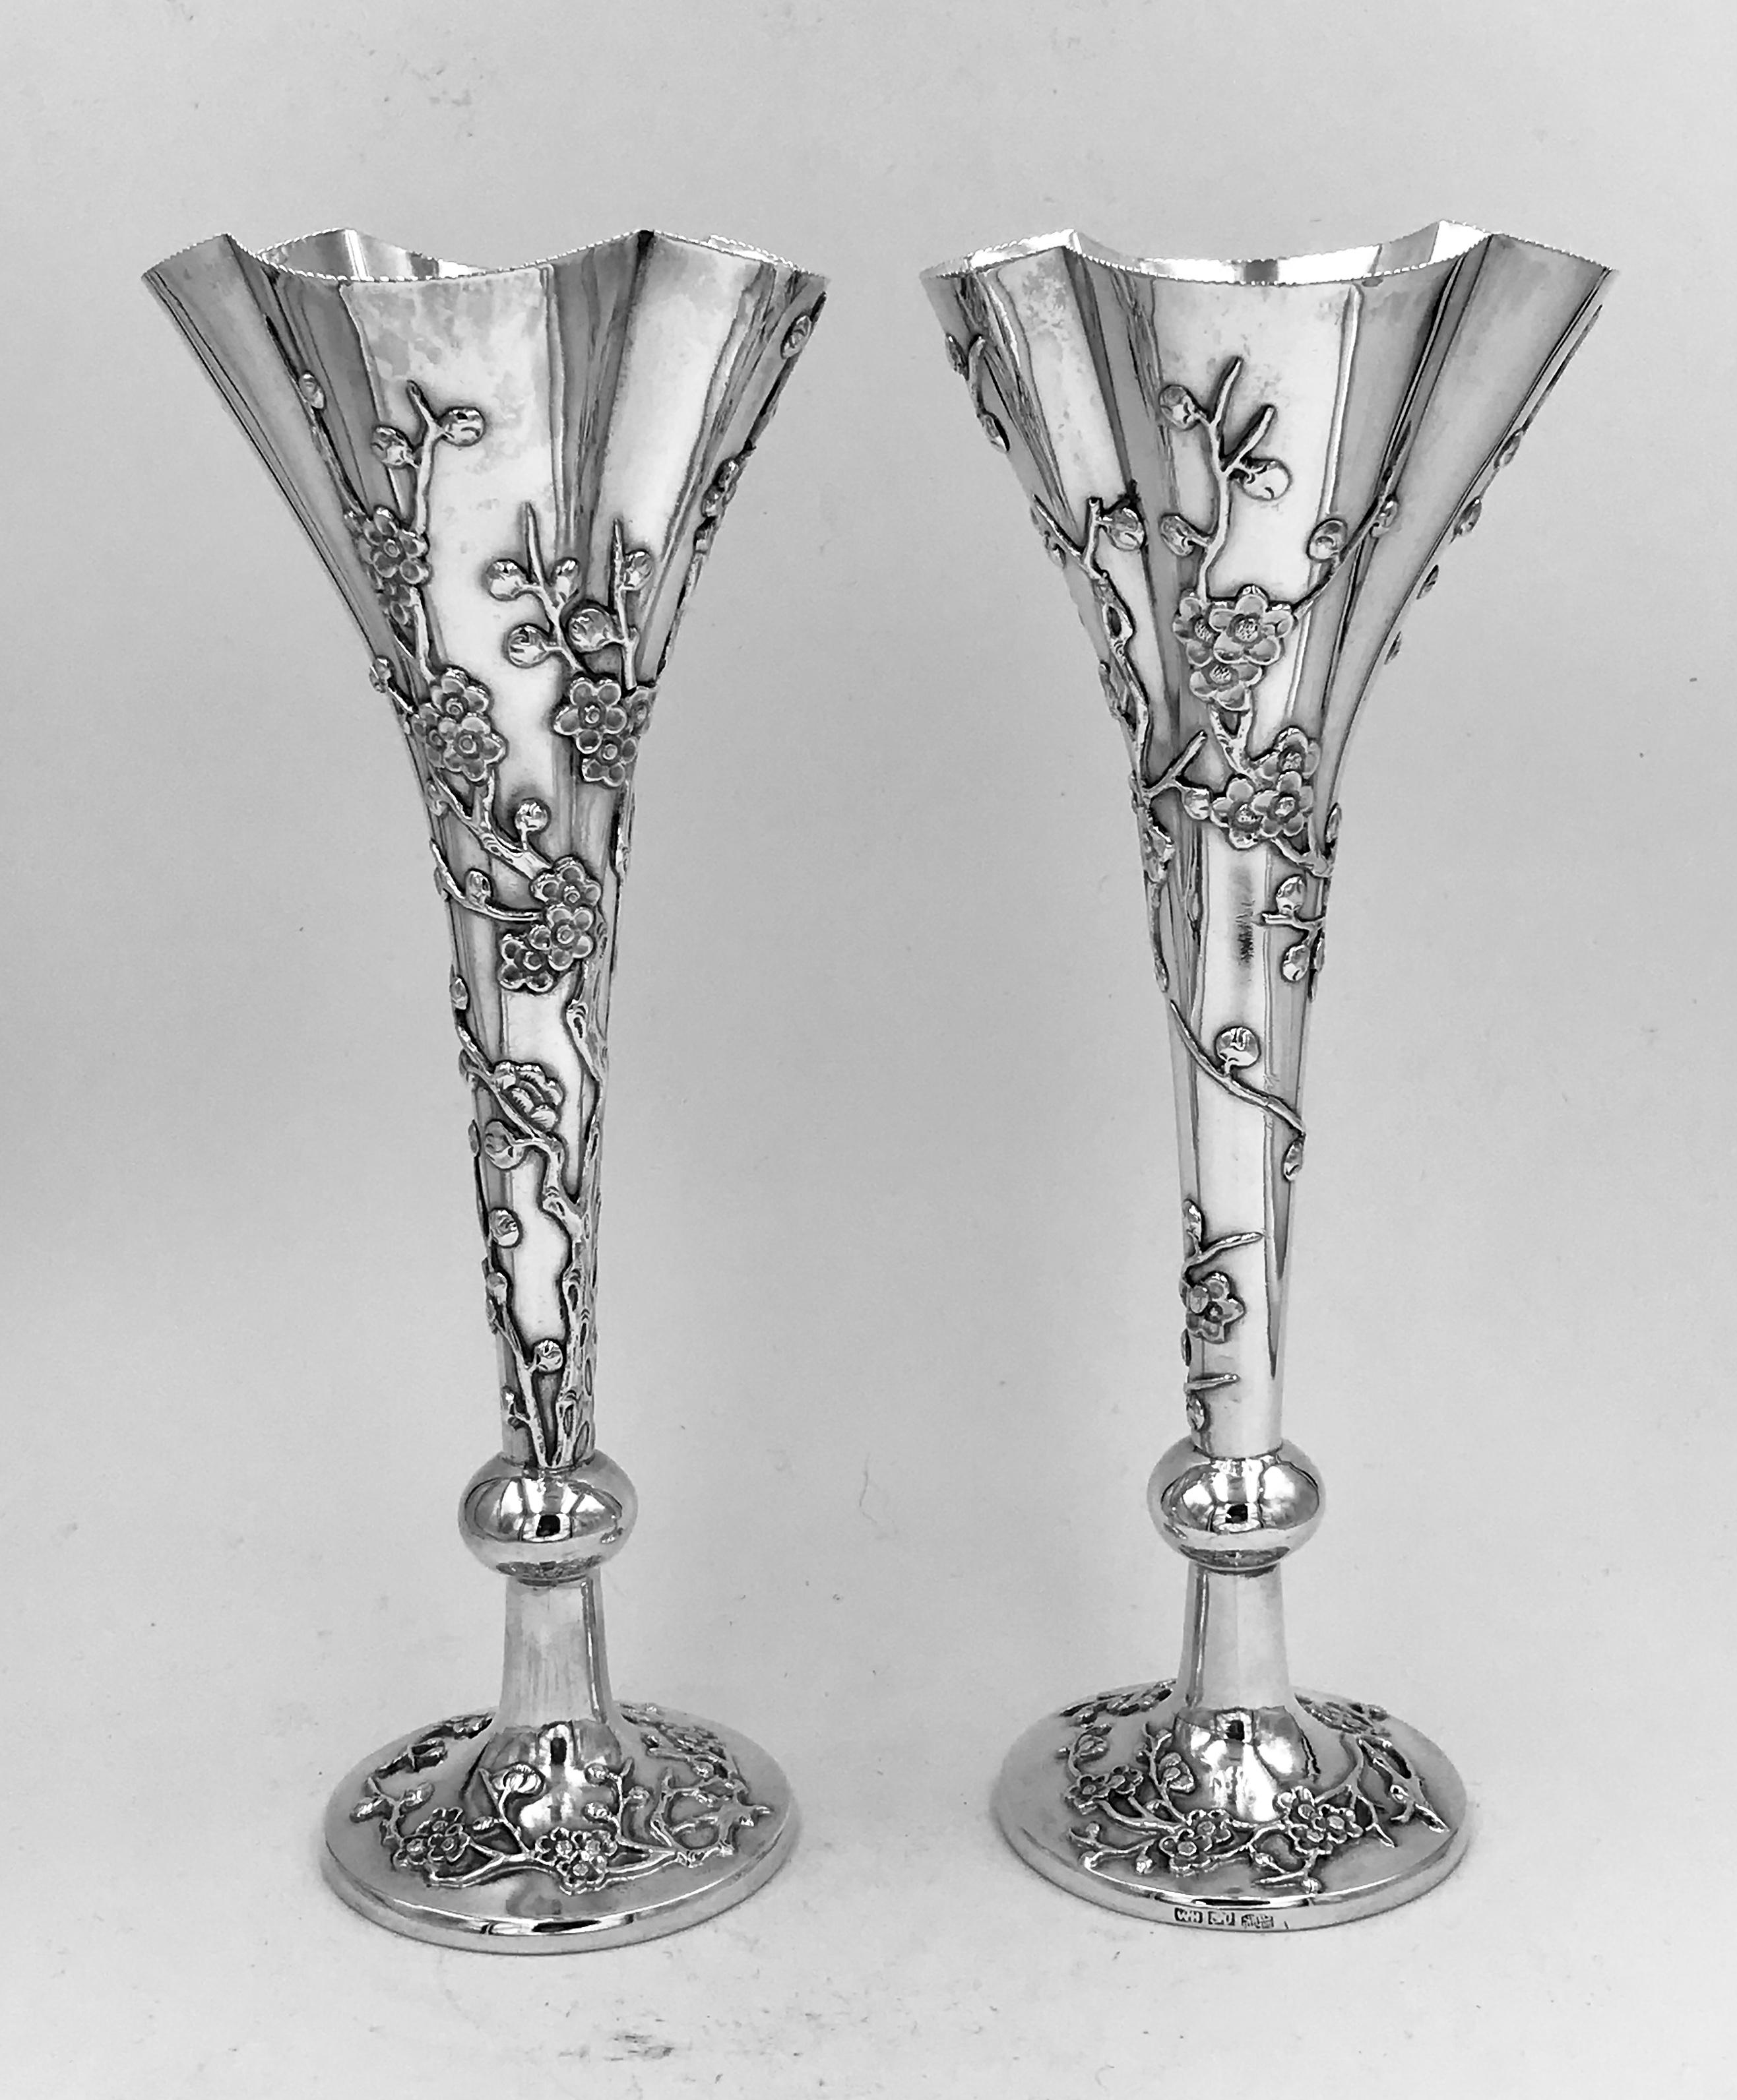 A Pair of Chinese Export Silver Flower Vases of trumpet form, each with circular base and rising to a flared, shaped top. The vases, which are decorated with applied prunus, were retailed by the famous and influential firm of Wang Hing '宏兴‘ around